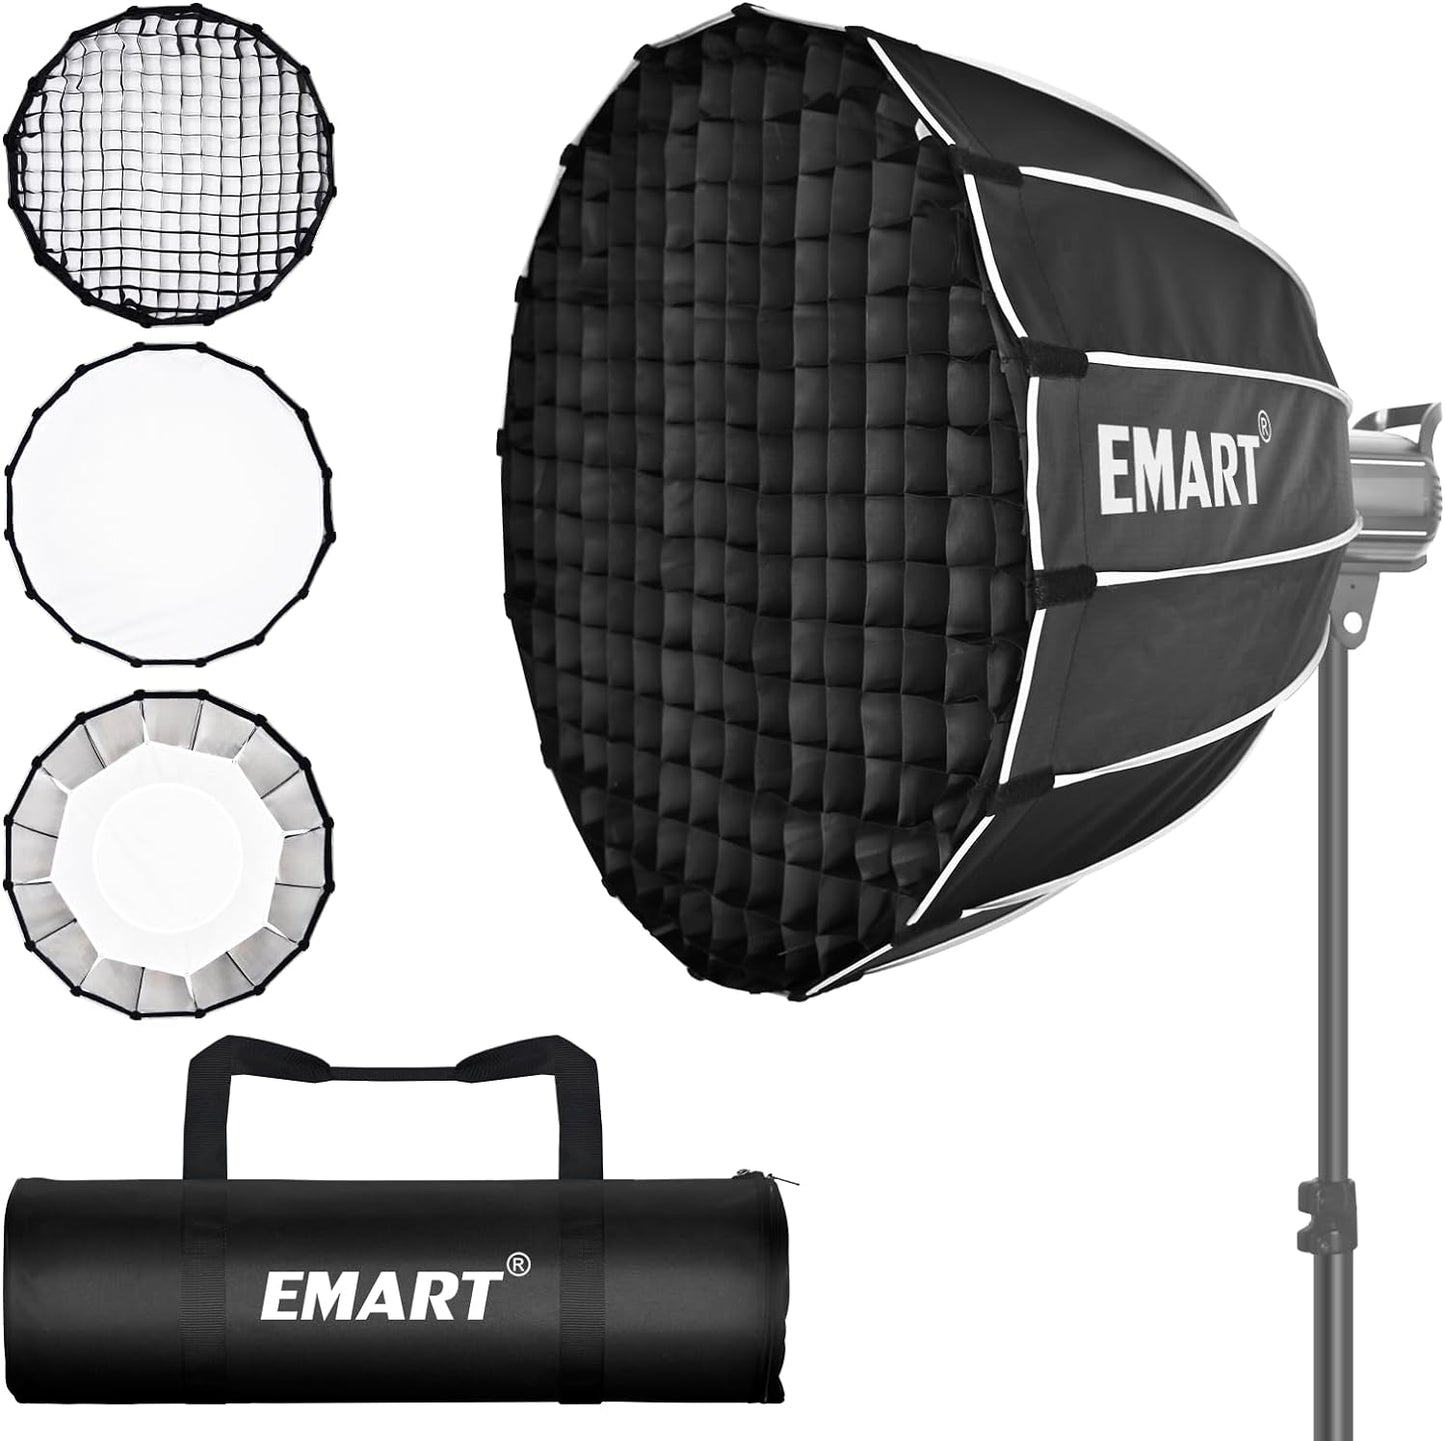 26inch/66cm Parabolic Softbox with Diffusers/Honeycomb Grid/Bag